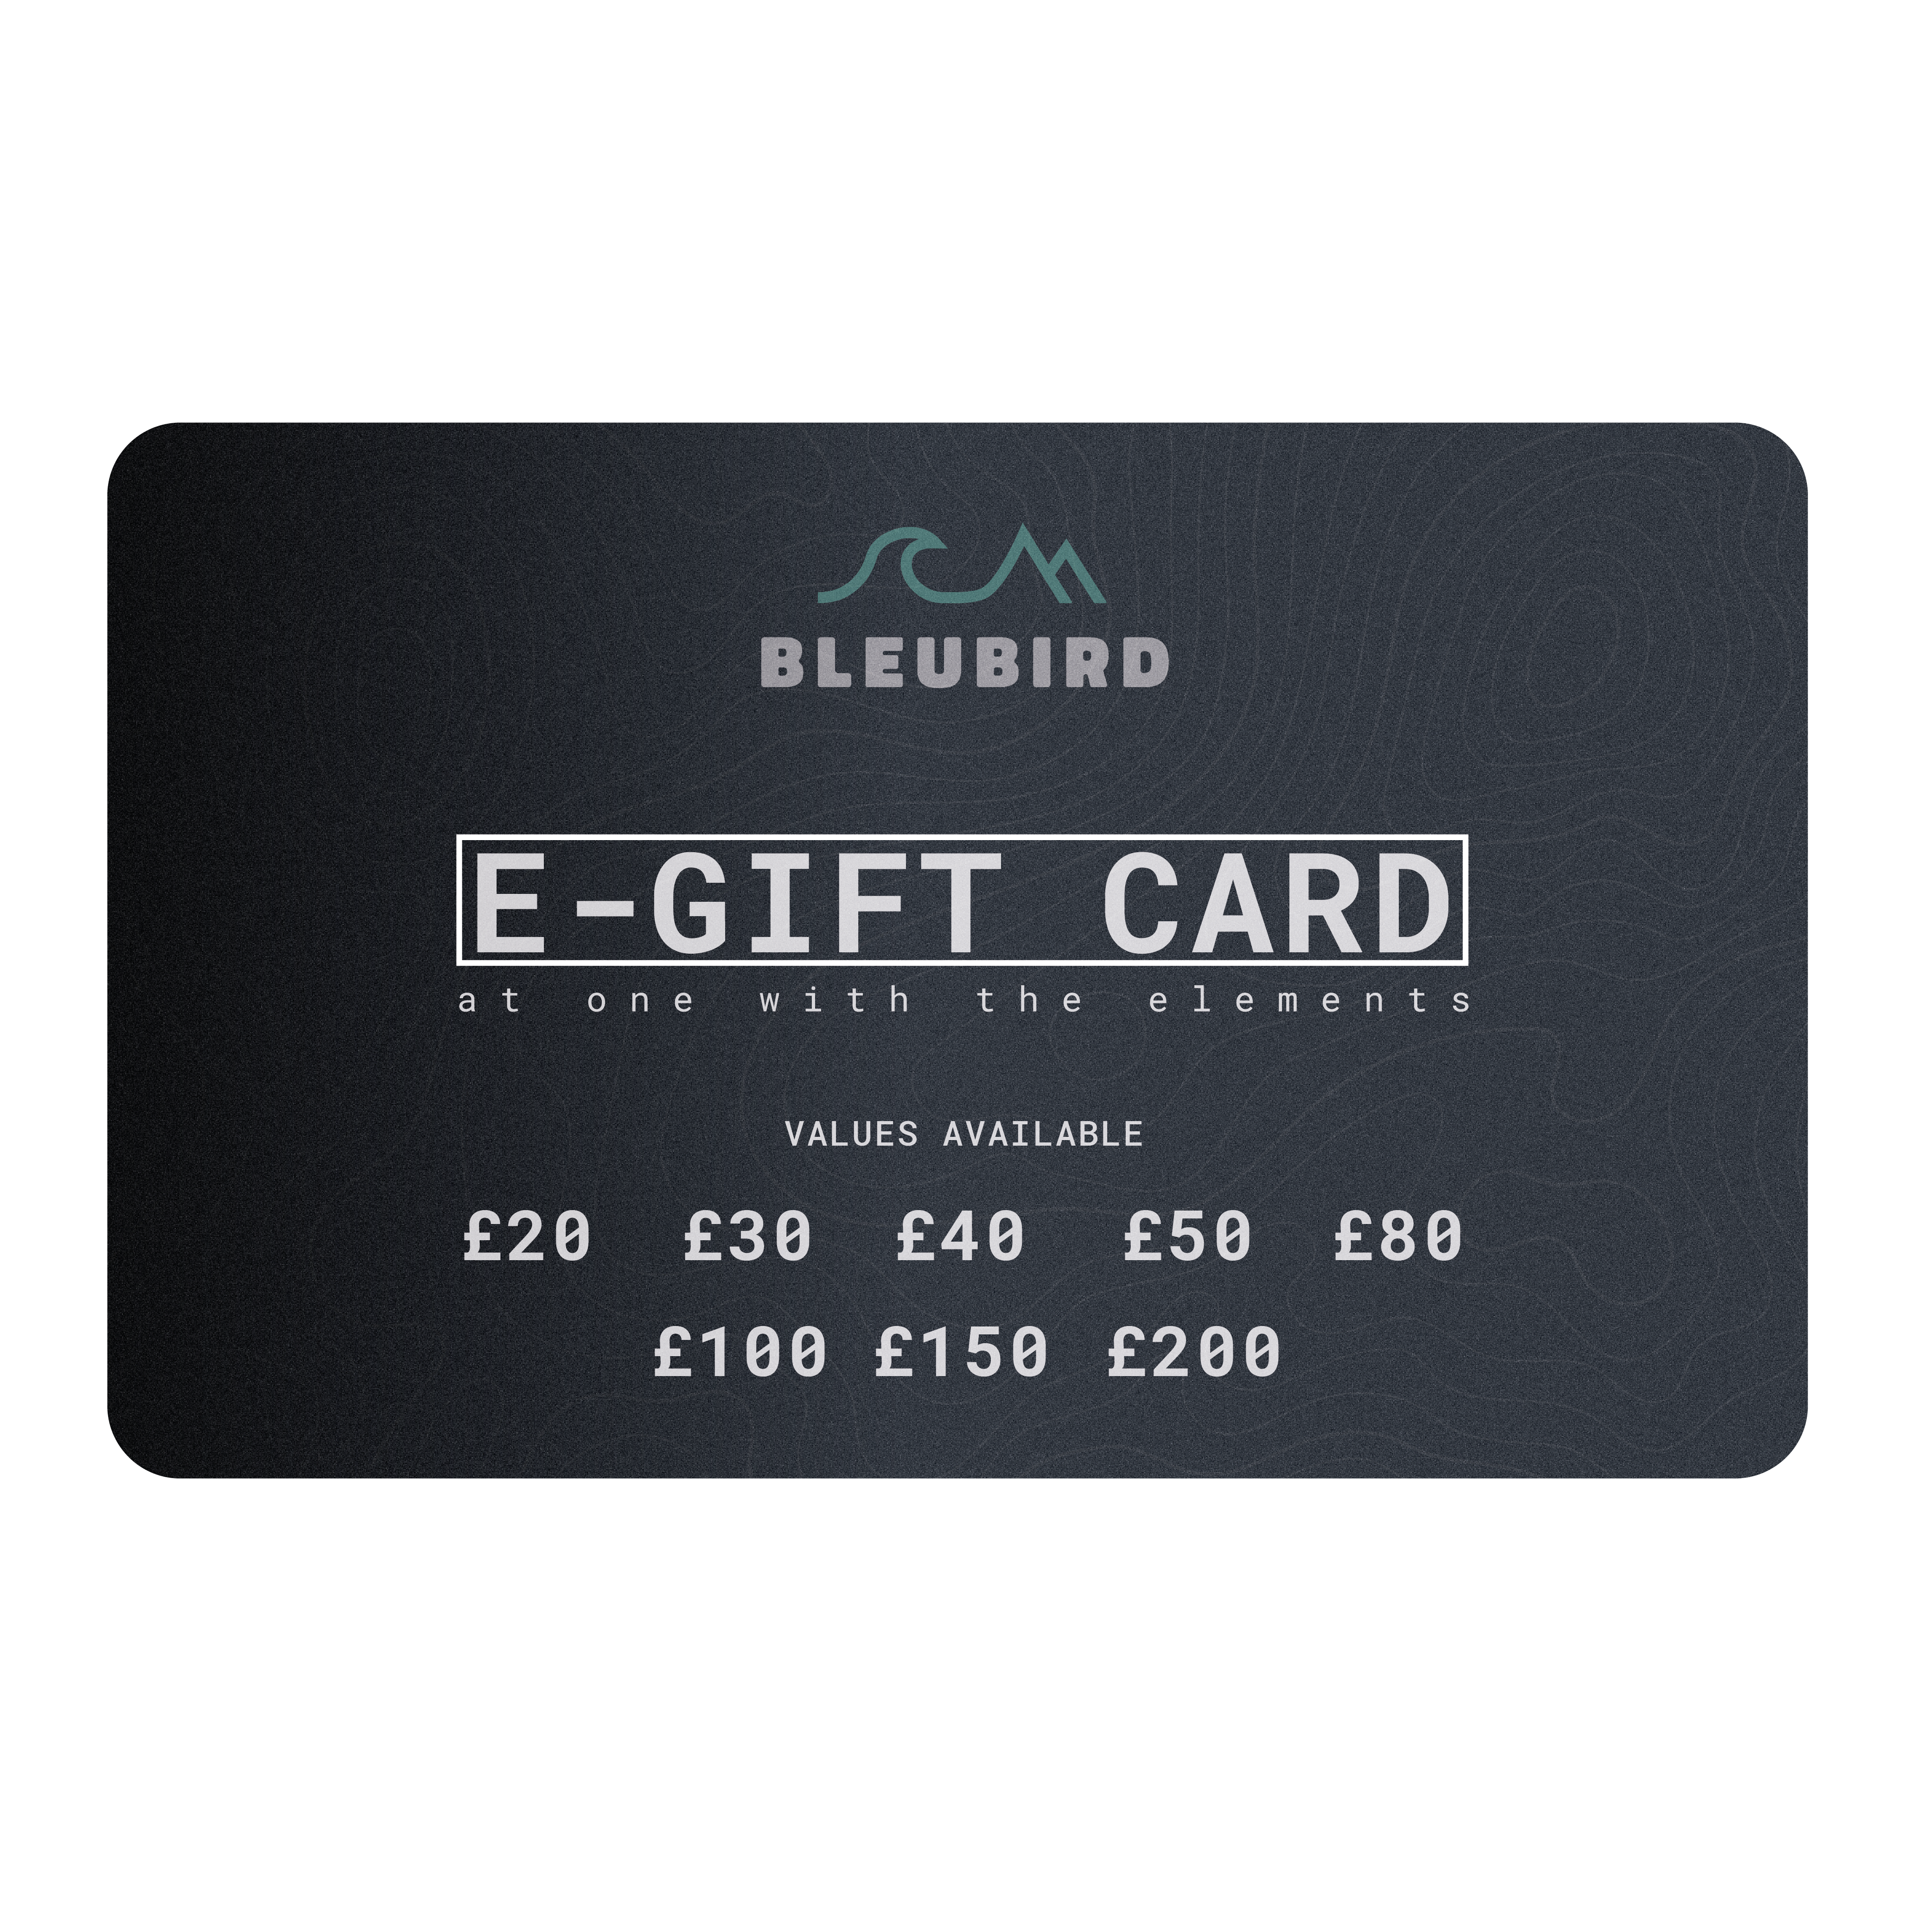 E-Gift Cards starting at just 5 AED - al giftcards